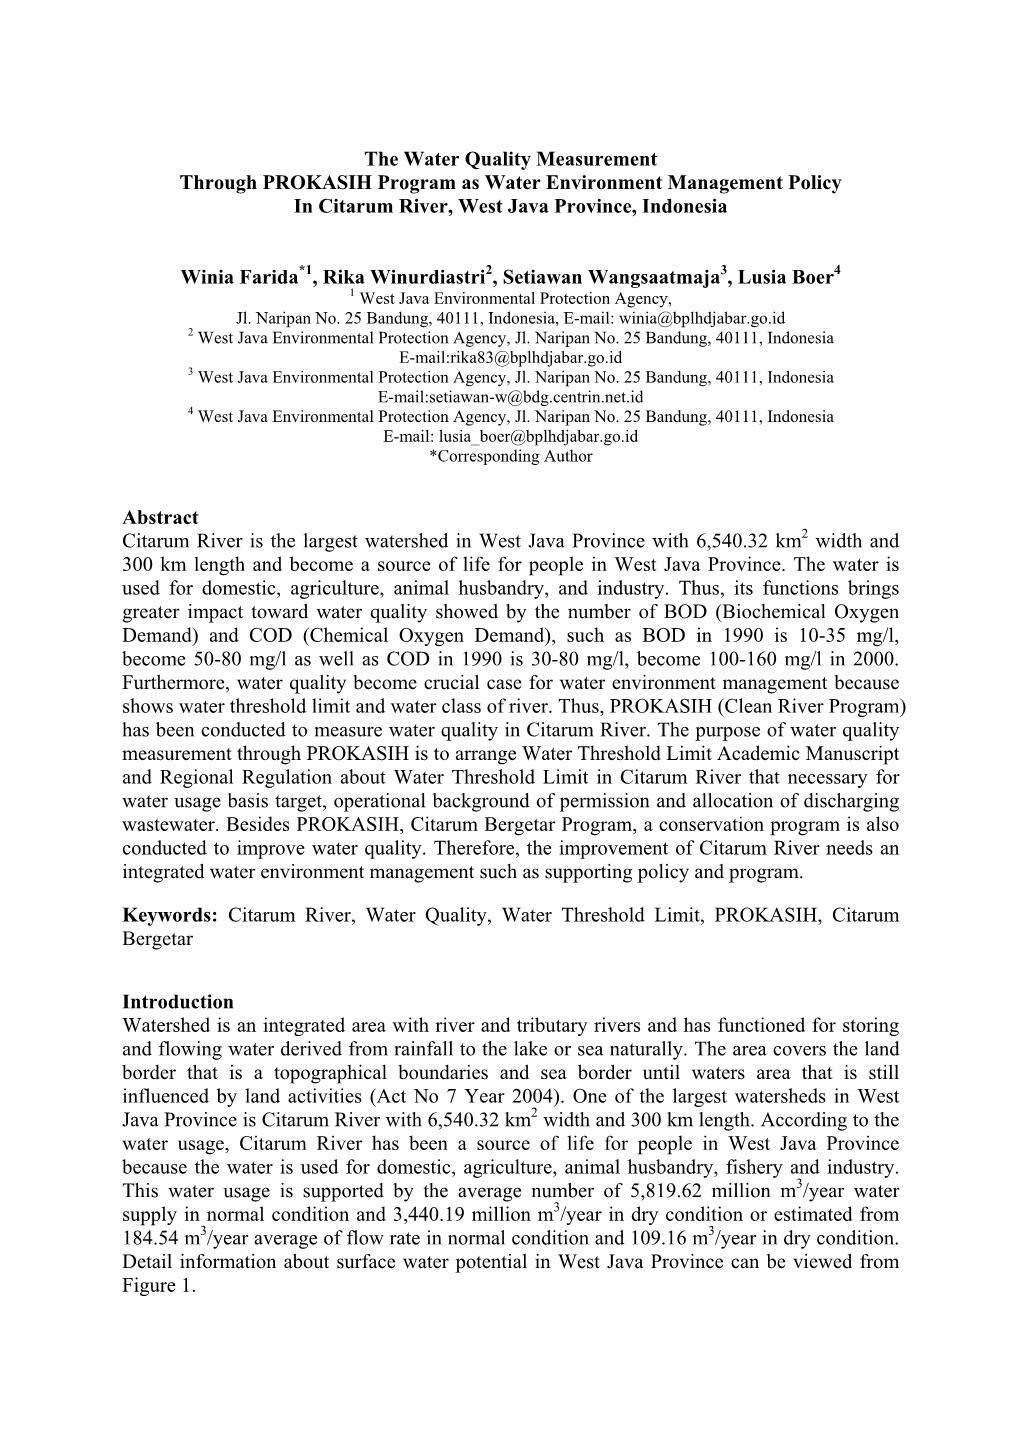 The Water Quality Measurement Through PROKASIH Program As Water Environment Management Policy in Citarum River, West Java Province, Indonesia